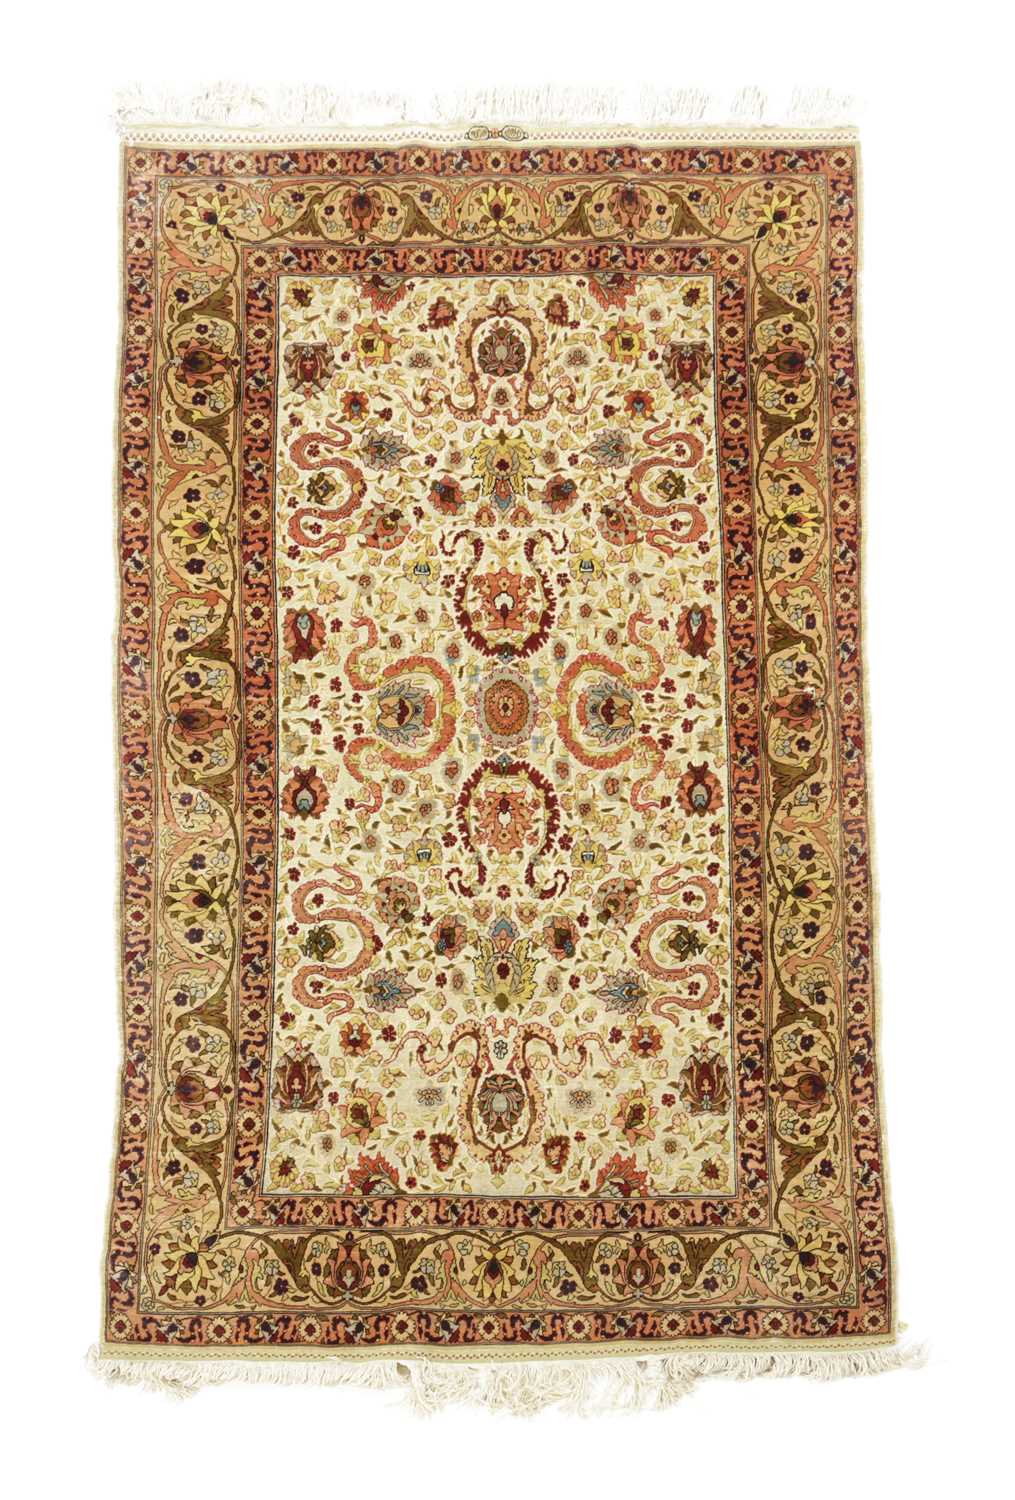 A FINE SILK AND METAL THREAD HEREKE RUG NORTH WEST ANATOLIA, C.1960 the pale celadon field with